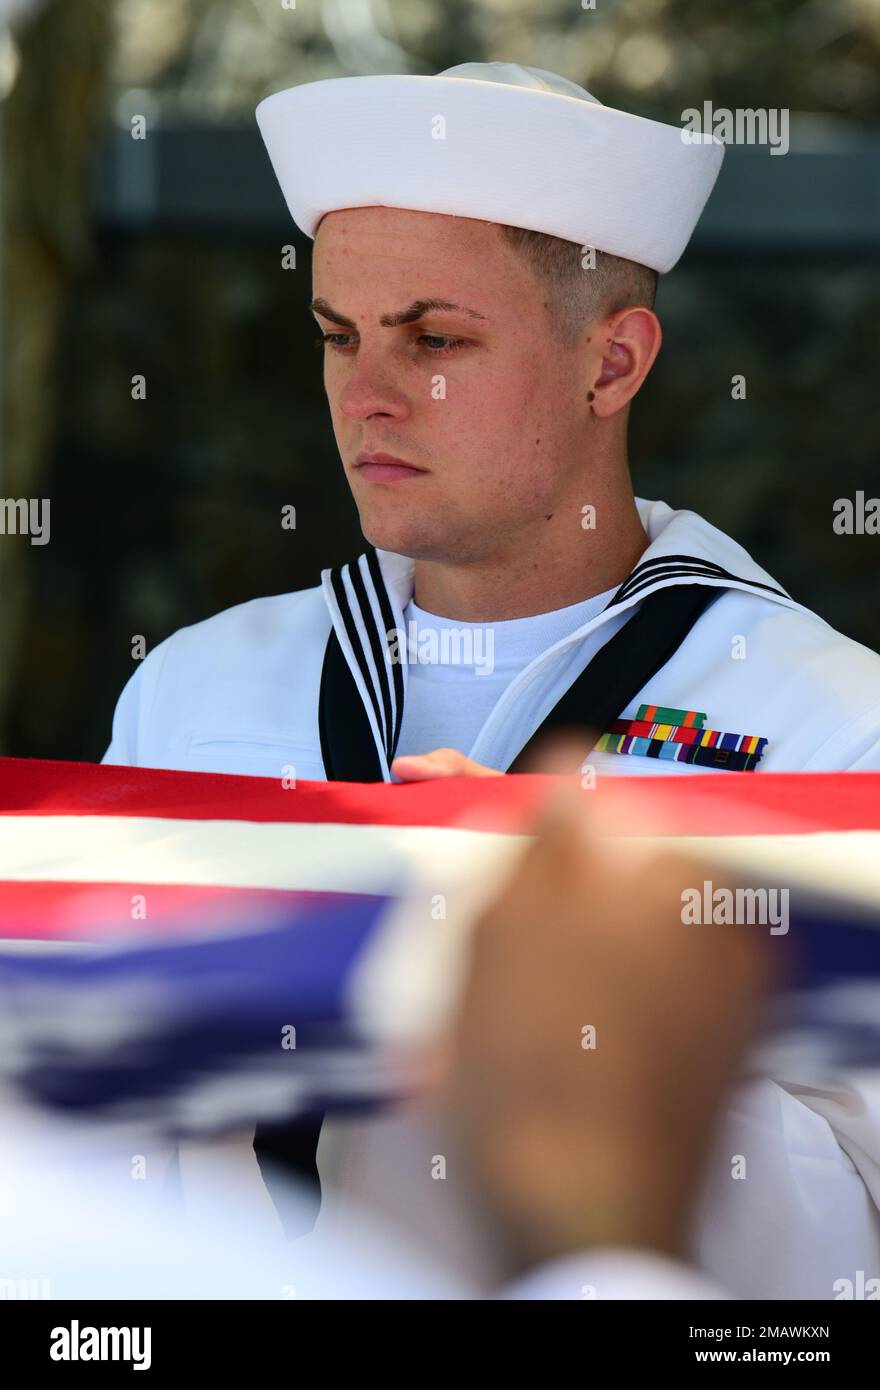 The Navy Region Hawaii Honor Guard spread the American flag over a casket during an internment ceremony for U.S. Navy Fire Controlman 2nd Class George Gilbert, 20, of Indianapolis, at the National Memorial Cemetery of the Pacific, Honolulu, HI, June 6, 2022. Gilbert was assigned to the USS Oklahoma, which sustained fire from Japanese aircraft and multiple torpedo hits causing the ship to capsize and resulted in the deaths of more than 400 crew members on Dec. 7, 1941, at Ford Island, Pearl Harbor. Gilbert was recently identified through DNA analysis by the Defense POW/MIA Accounting Agency for Stock Photo